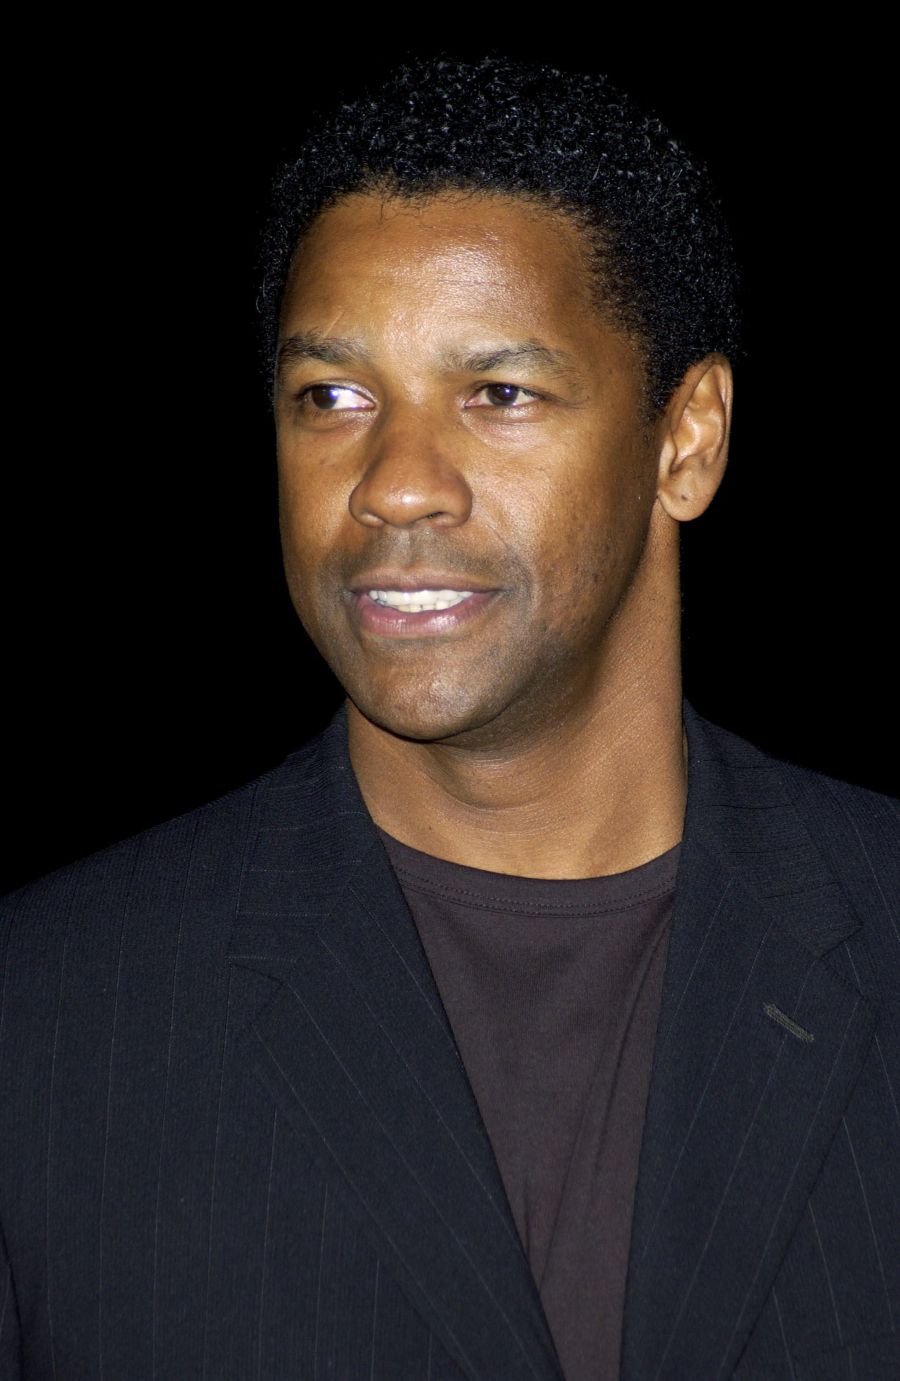 Then And Now Denzel Washington Over The Years [photos] 100 3